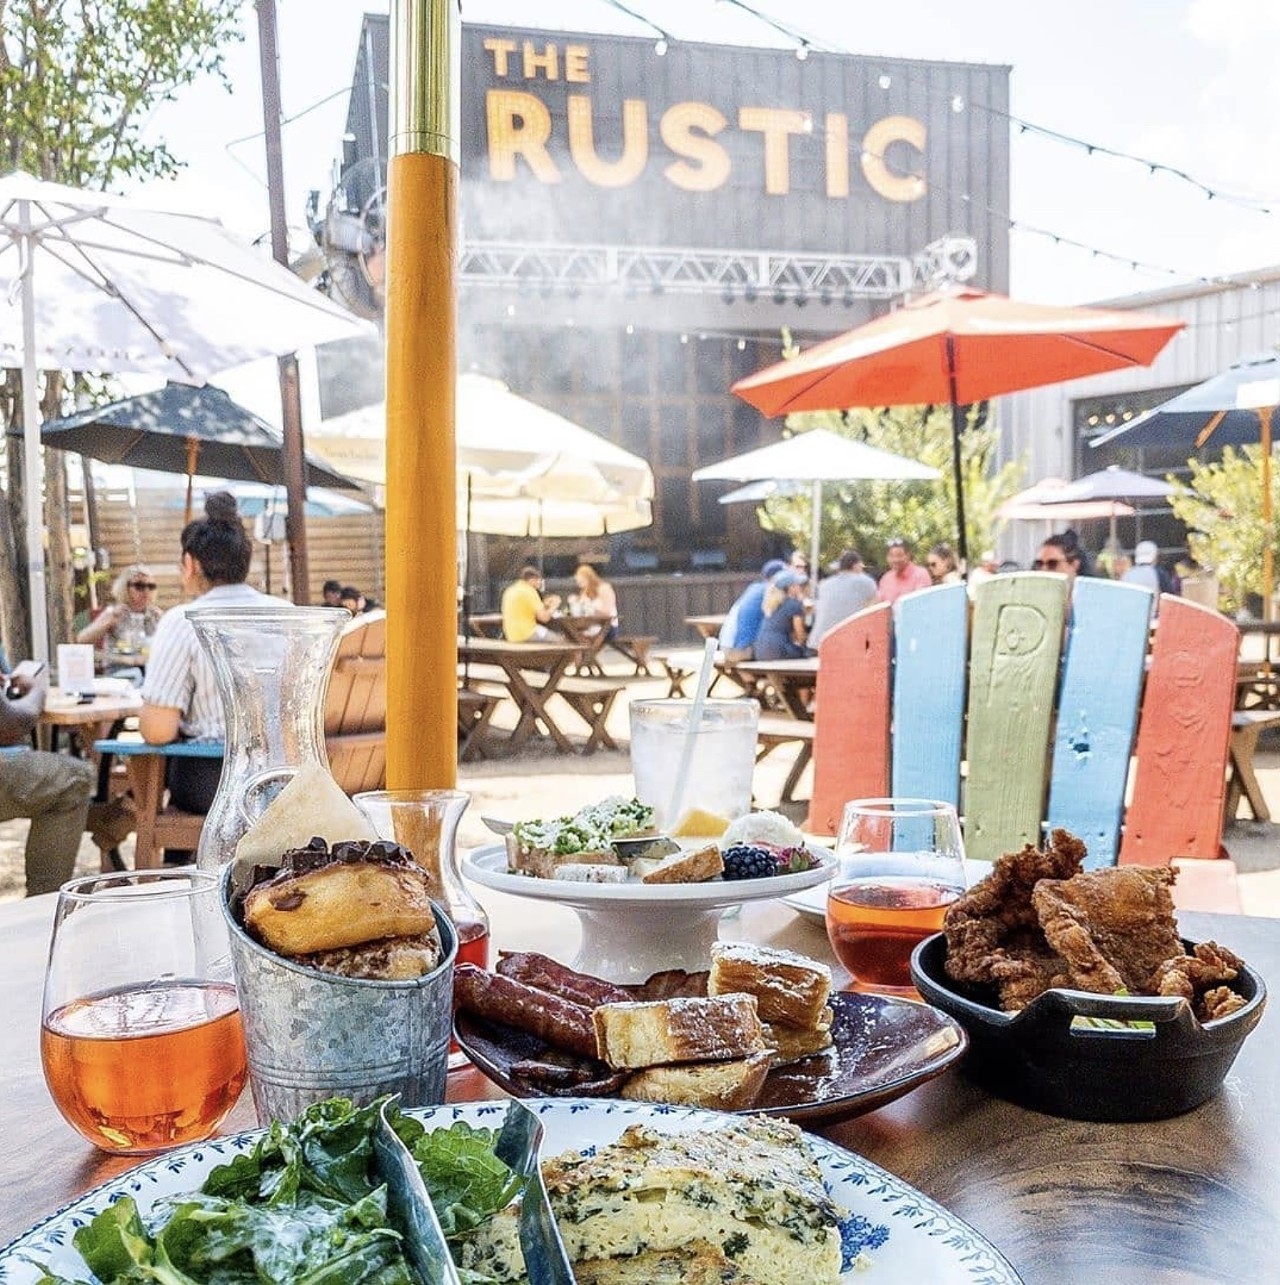 The Rustic
17619 La Cantera Parkway Unit 204, (210) 245-7500, therustic.com/san-antonio
Sitting right outside of the loop, The Rustic offers live music, a huge outdoor seating area and a diverse food menu. They update their social media platforms regularly for the various music lineups happening throughout the week. 
Photo via Instagram / therusticsa